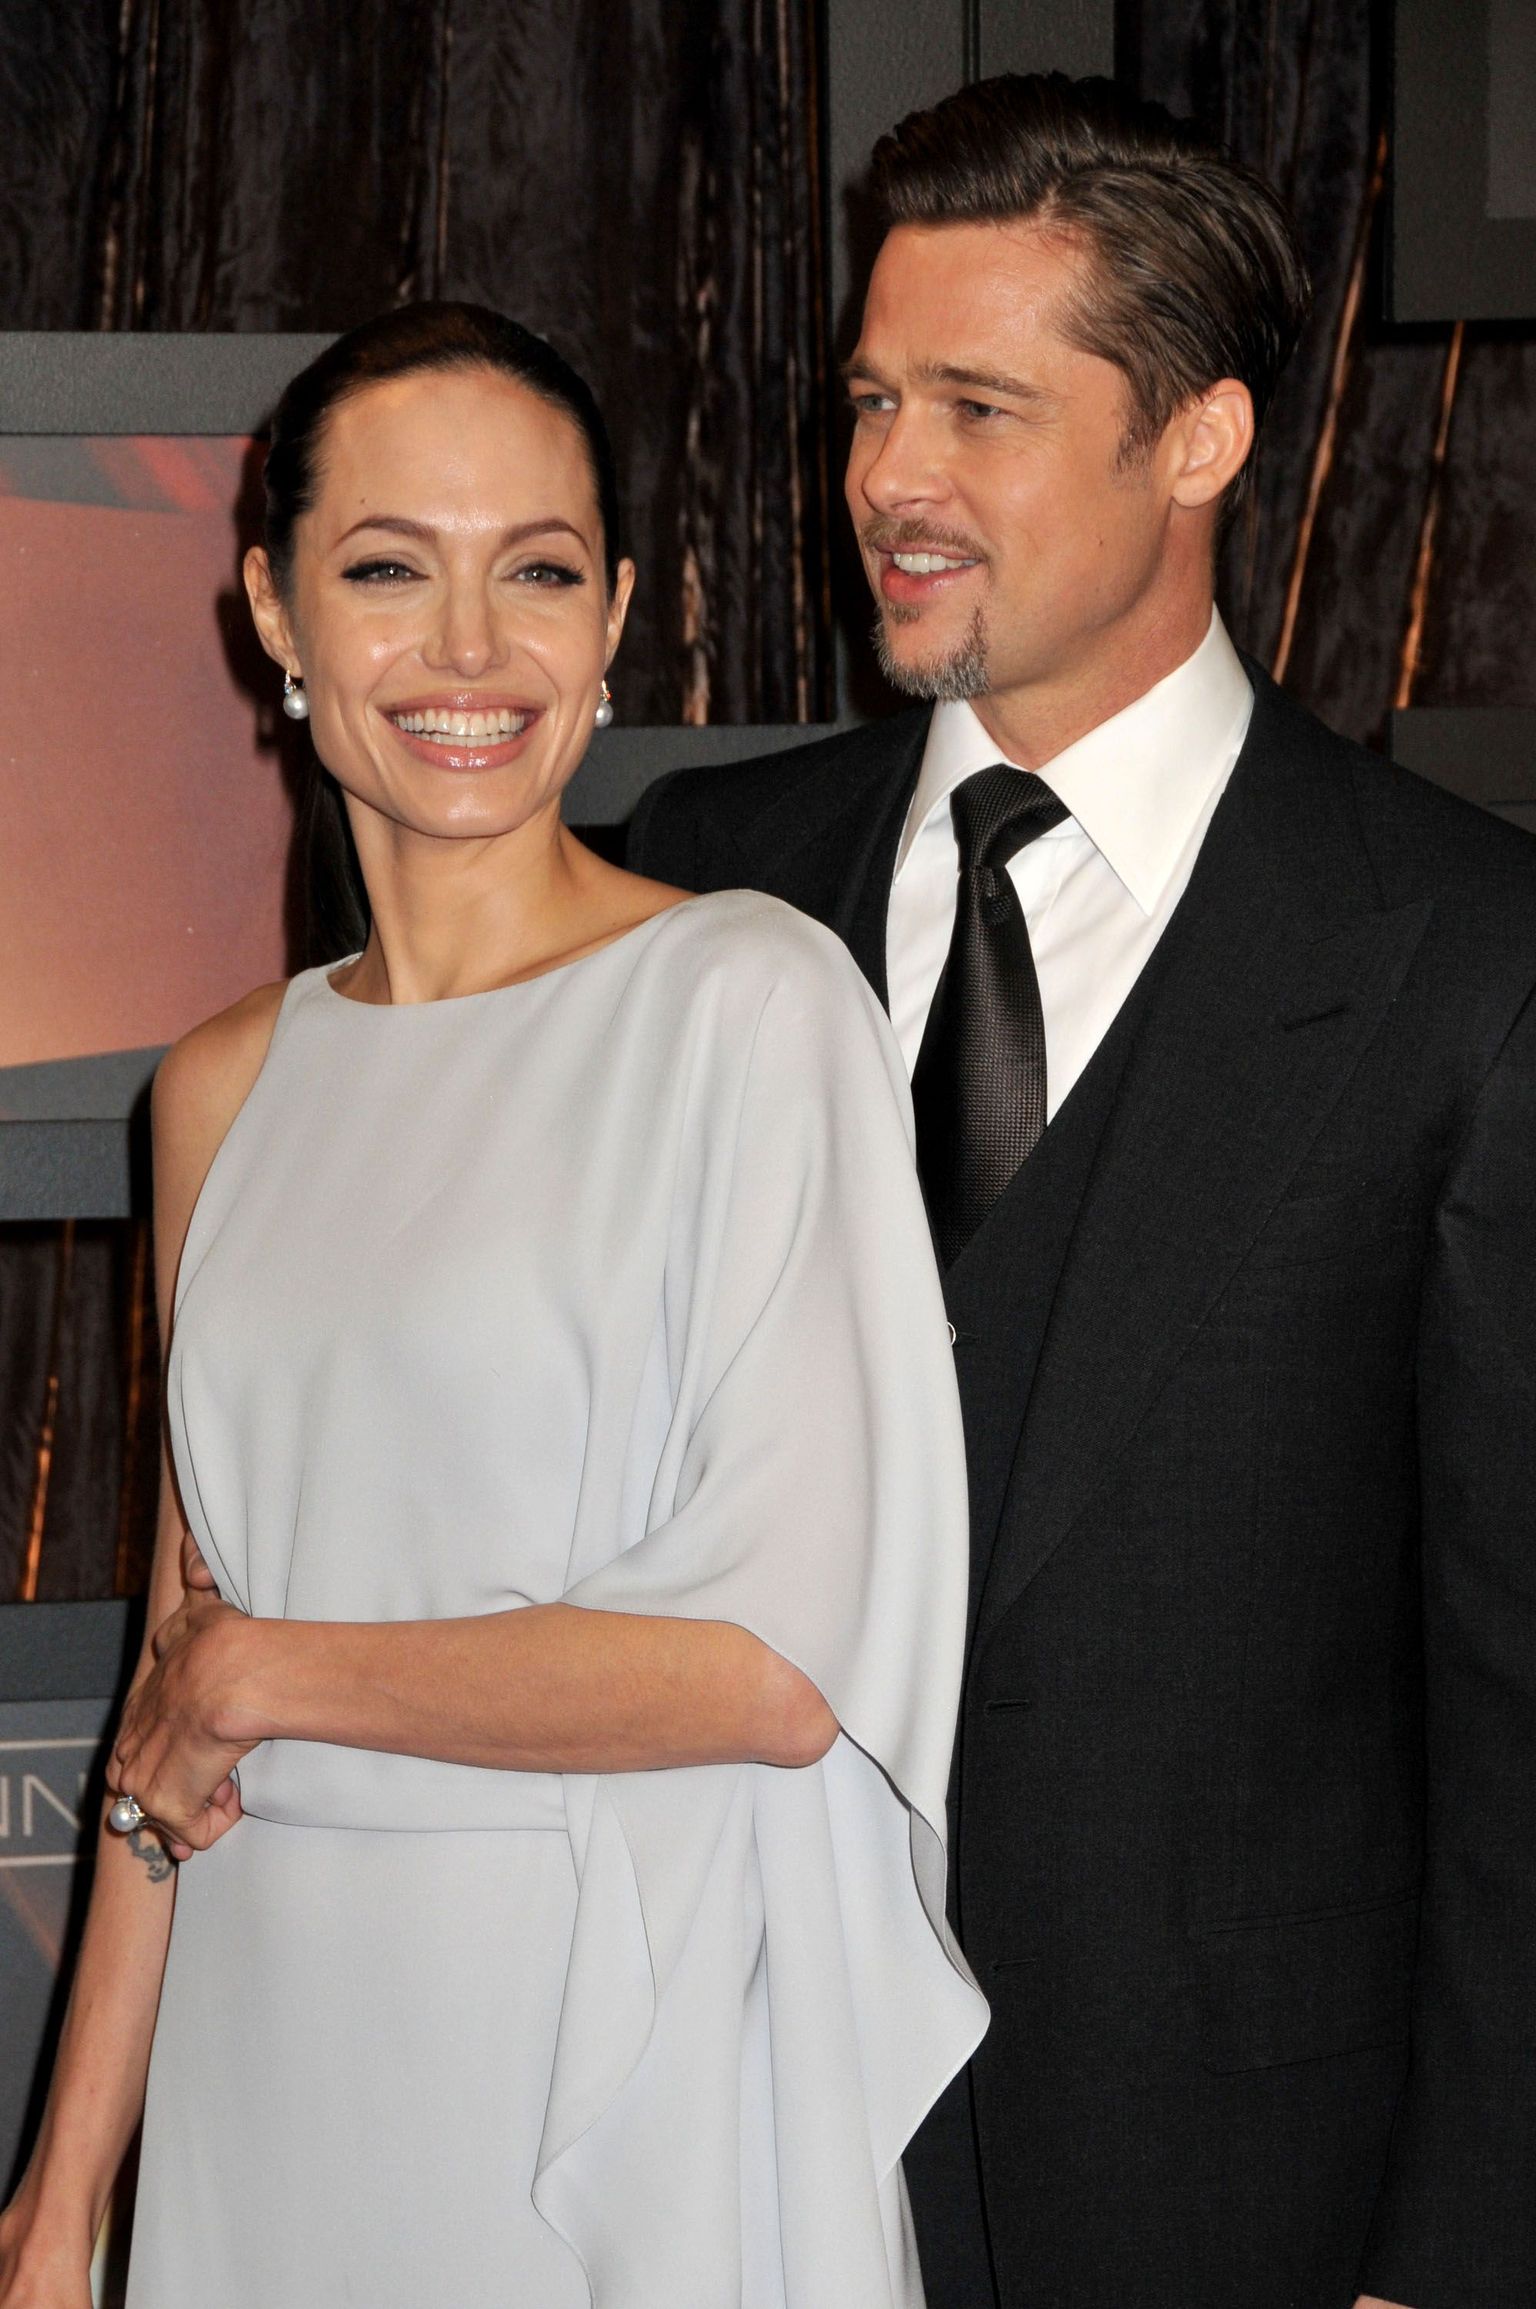 20 September 2016 - Los Angeles, CA - Angelina Jolie Pitt has filed for divorce from Brad Pitt. Jolie Pitt, 41, filed legal docs Monday citing irreconcilable differences. Jolie Pitt requested physical custody of the couple's shared six children